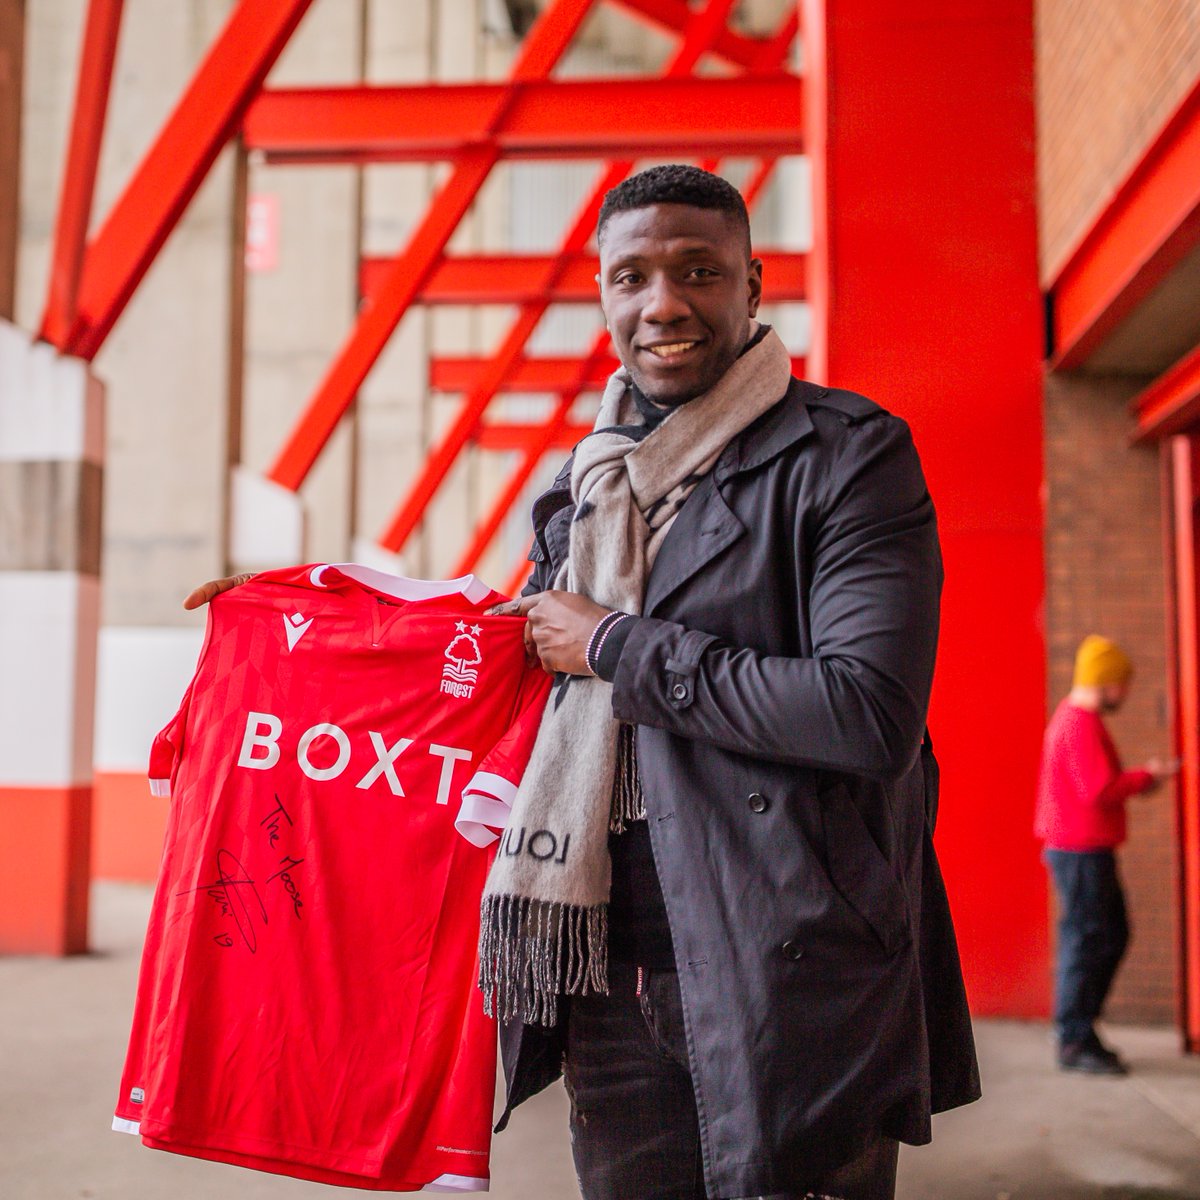 🚨 #NFFCVIP 𝘀𝗶𝗴𝗻𝗲𝗱 𝘀𝗵𝗶𝗿𝘁 𝗴𝗶𝘃𝗲𝗮𝘄𝗮𝘆 ✍️ 👊 Retweet, follow @NFFC & comment #NFFCVIP to be in with a chance of winning this signed Guy Moussi home shirt 🔜 Winner chosen at random from across social media channels 📆 Competition ends 1pm Friday 🌳🔴 #NFFC